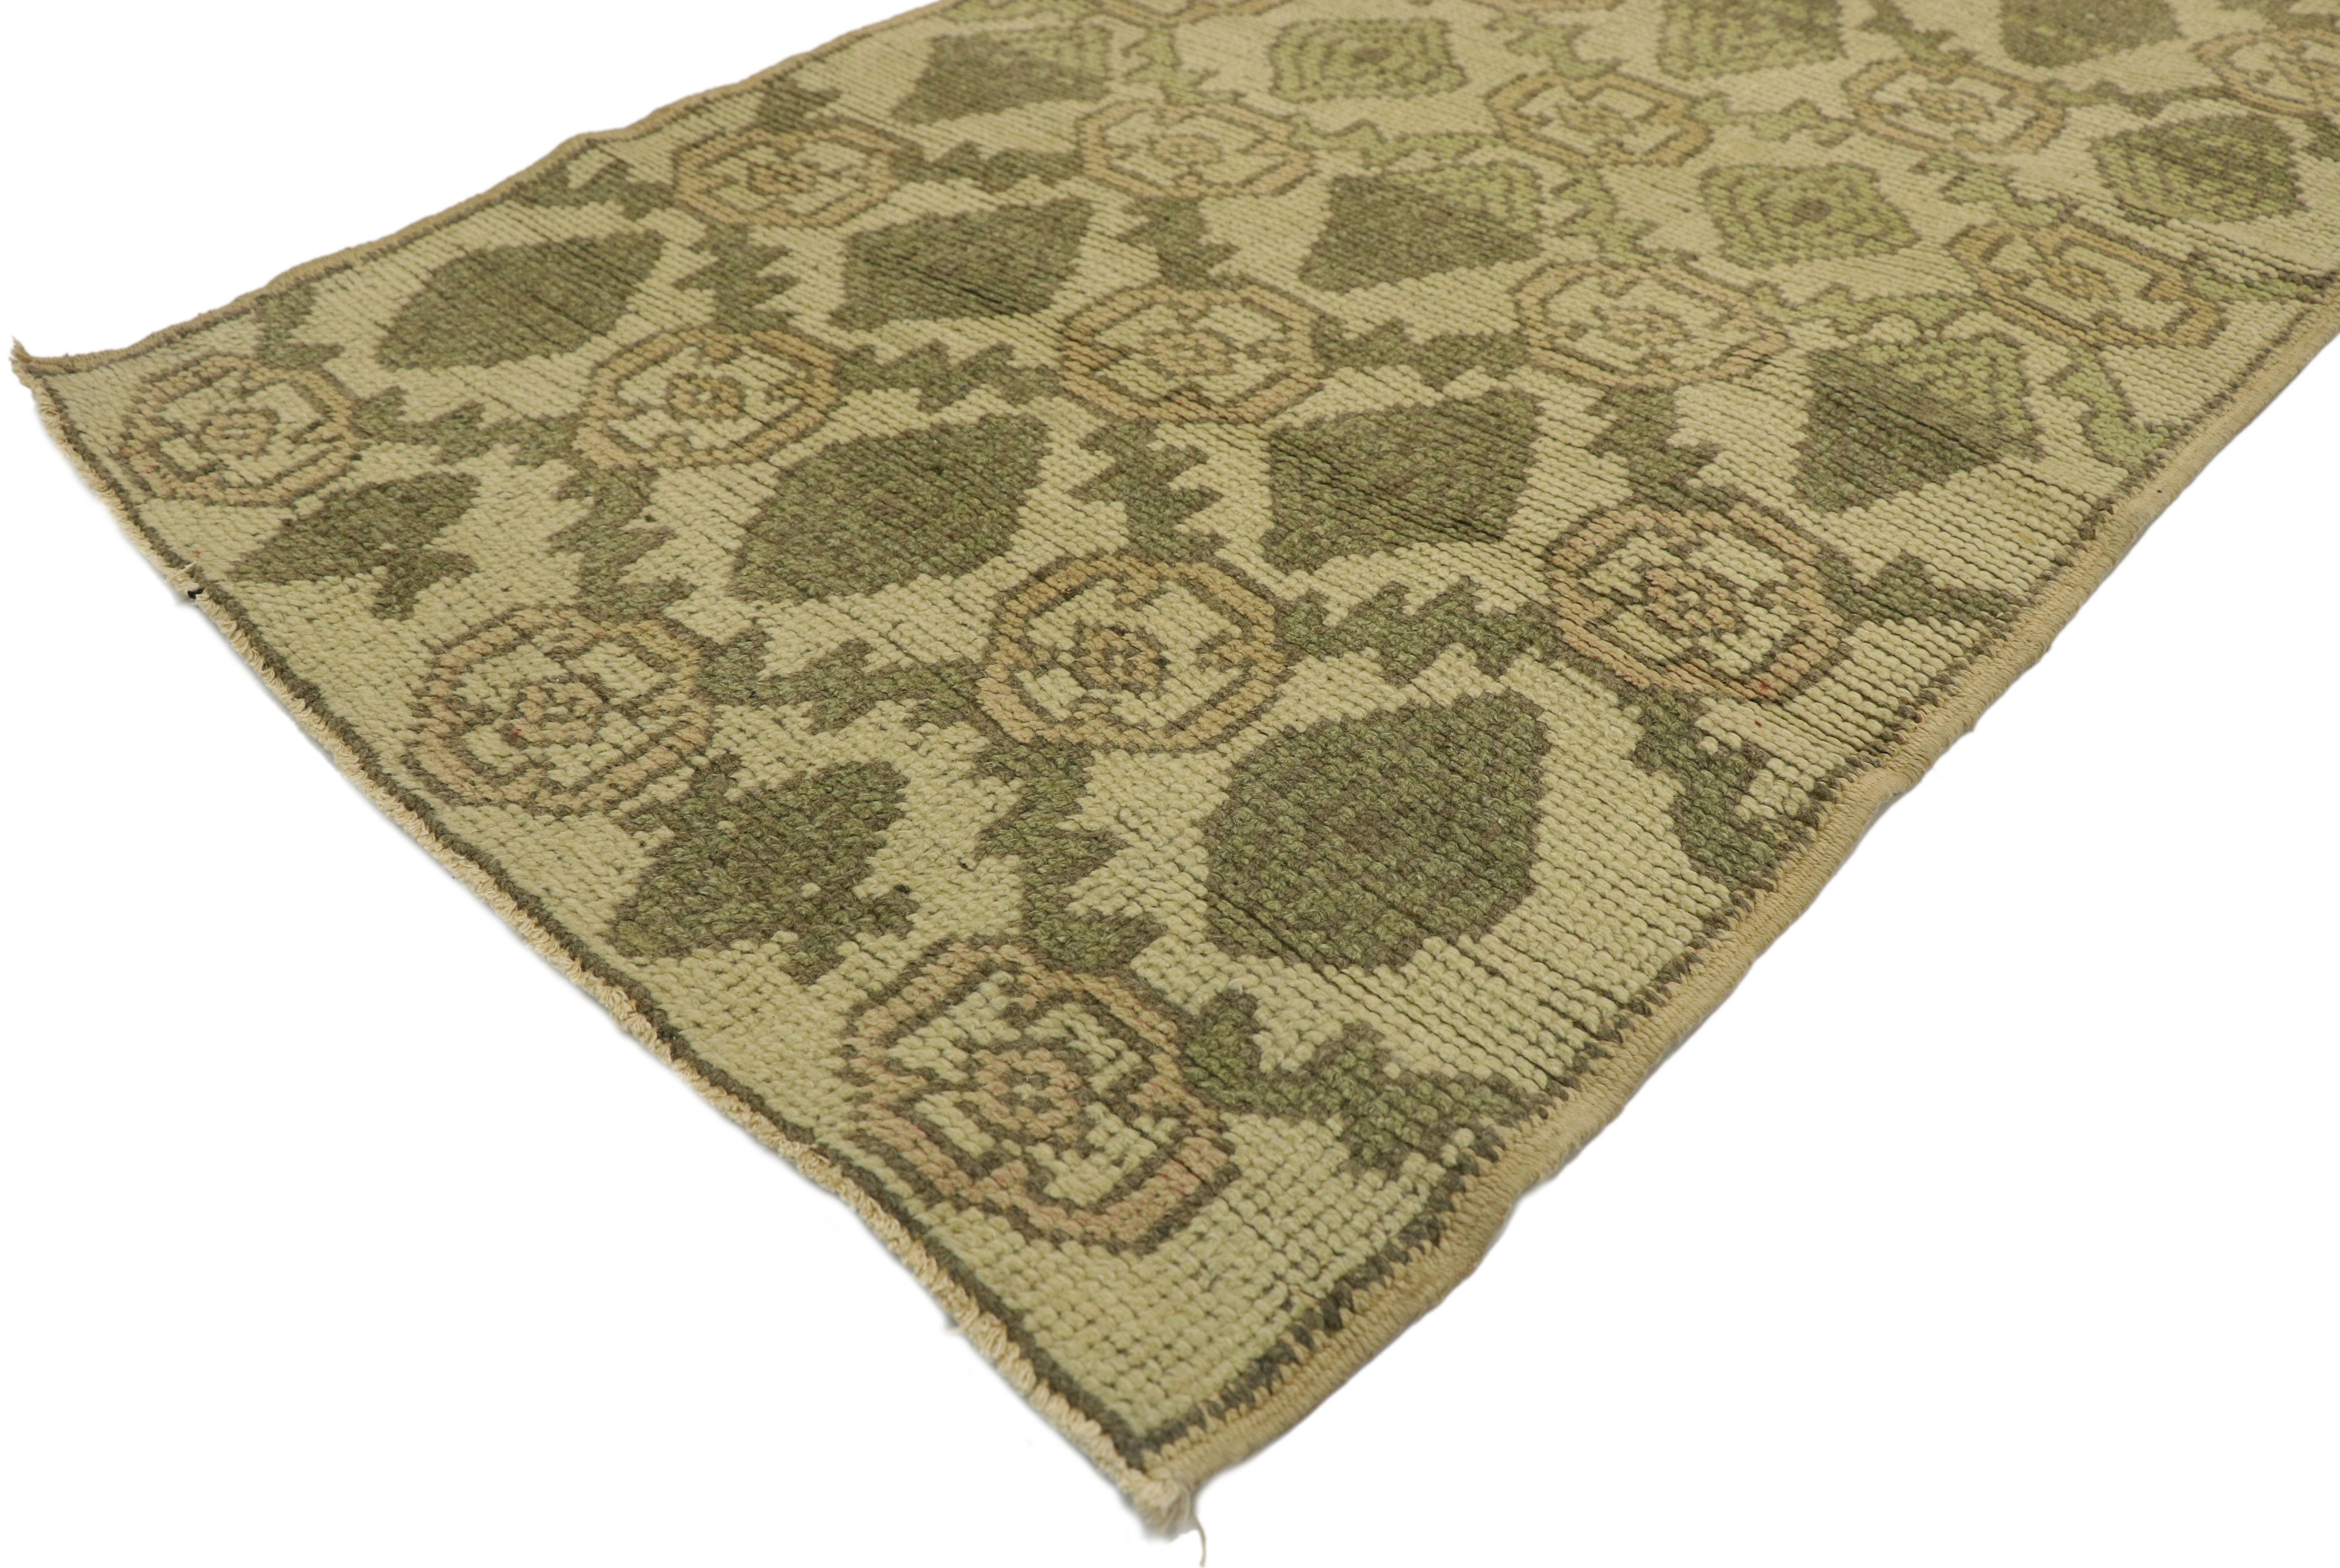 51048 Vintage Turkish Oushak Runner with Queen Anne Late ​Victorian Style, Extra-Long Hallway Runner 02'02 x 18'02. Make pass-through spaces pretty with this hand-knotted wool vintage Turkish Oushak runner. This Victorian style extra-long hallway